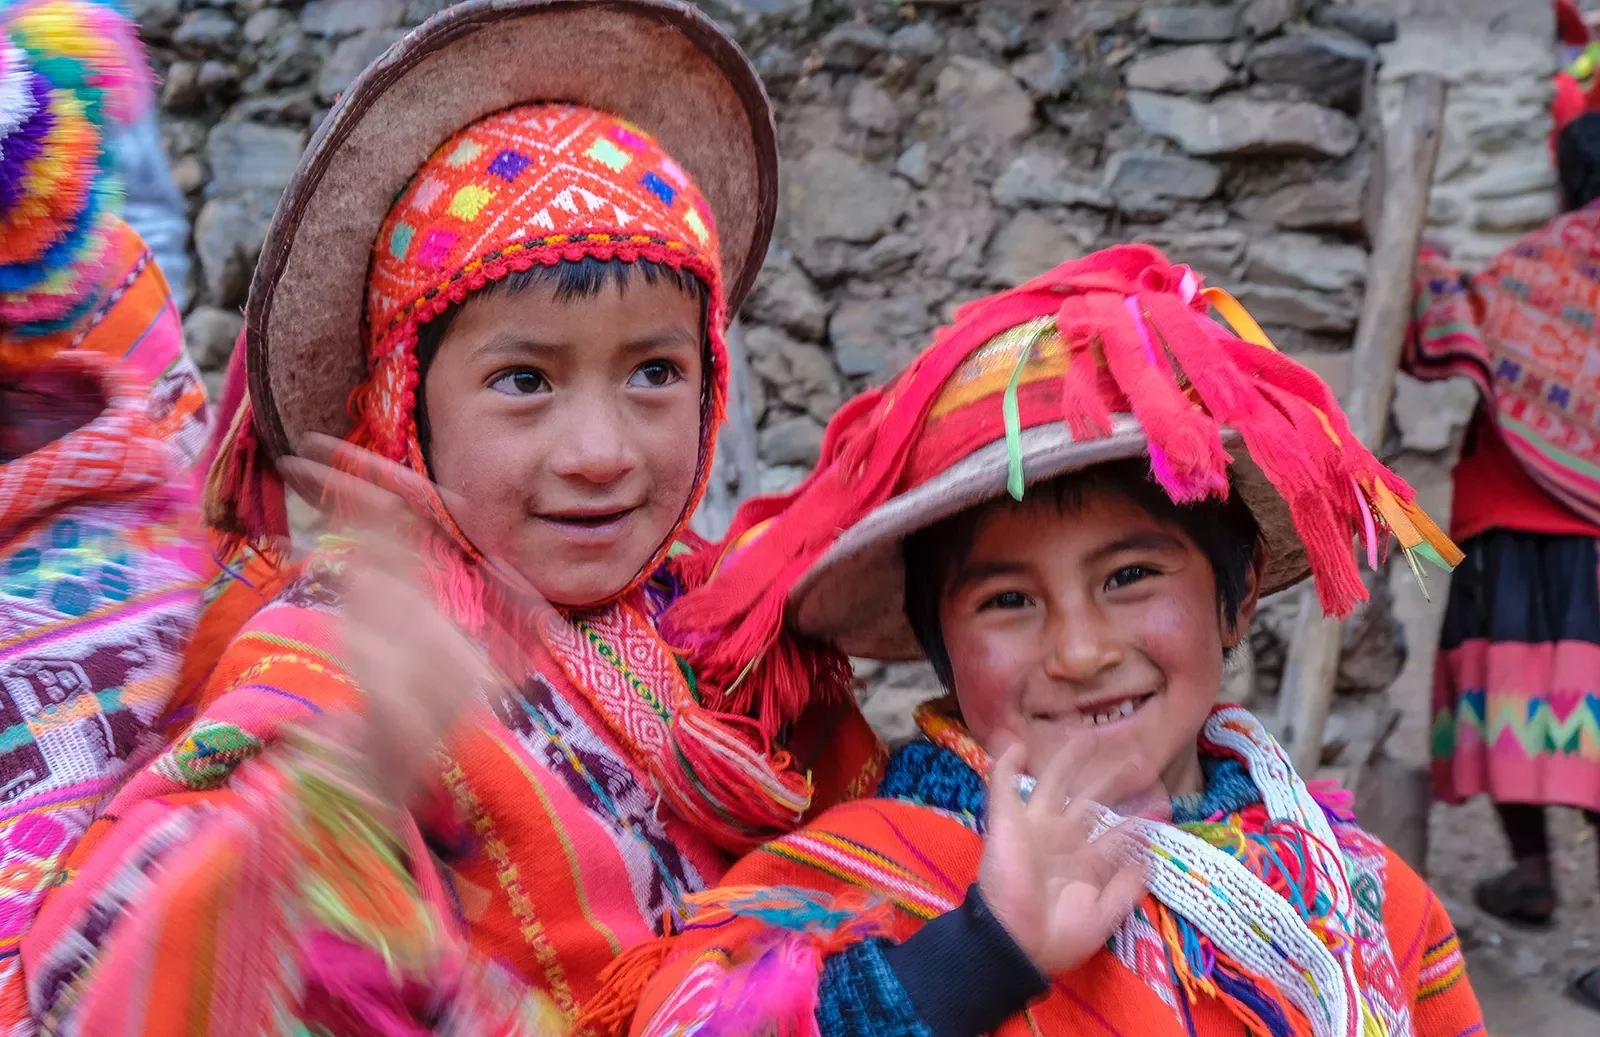 Two children in vibrant pink and red traditional Peruvian clothes.